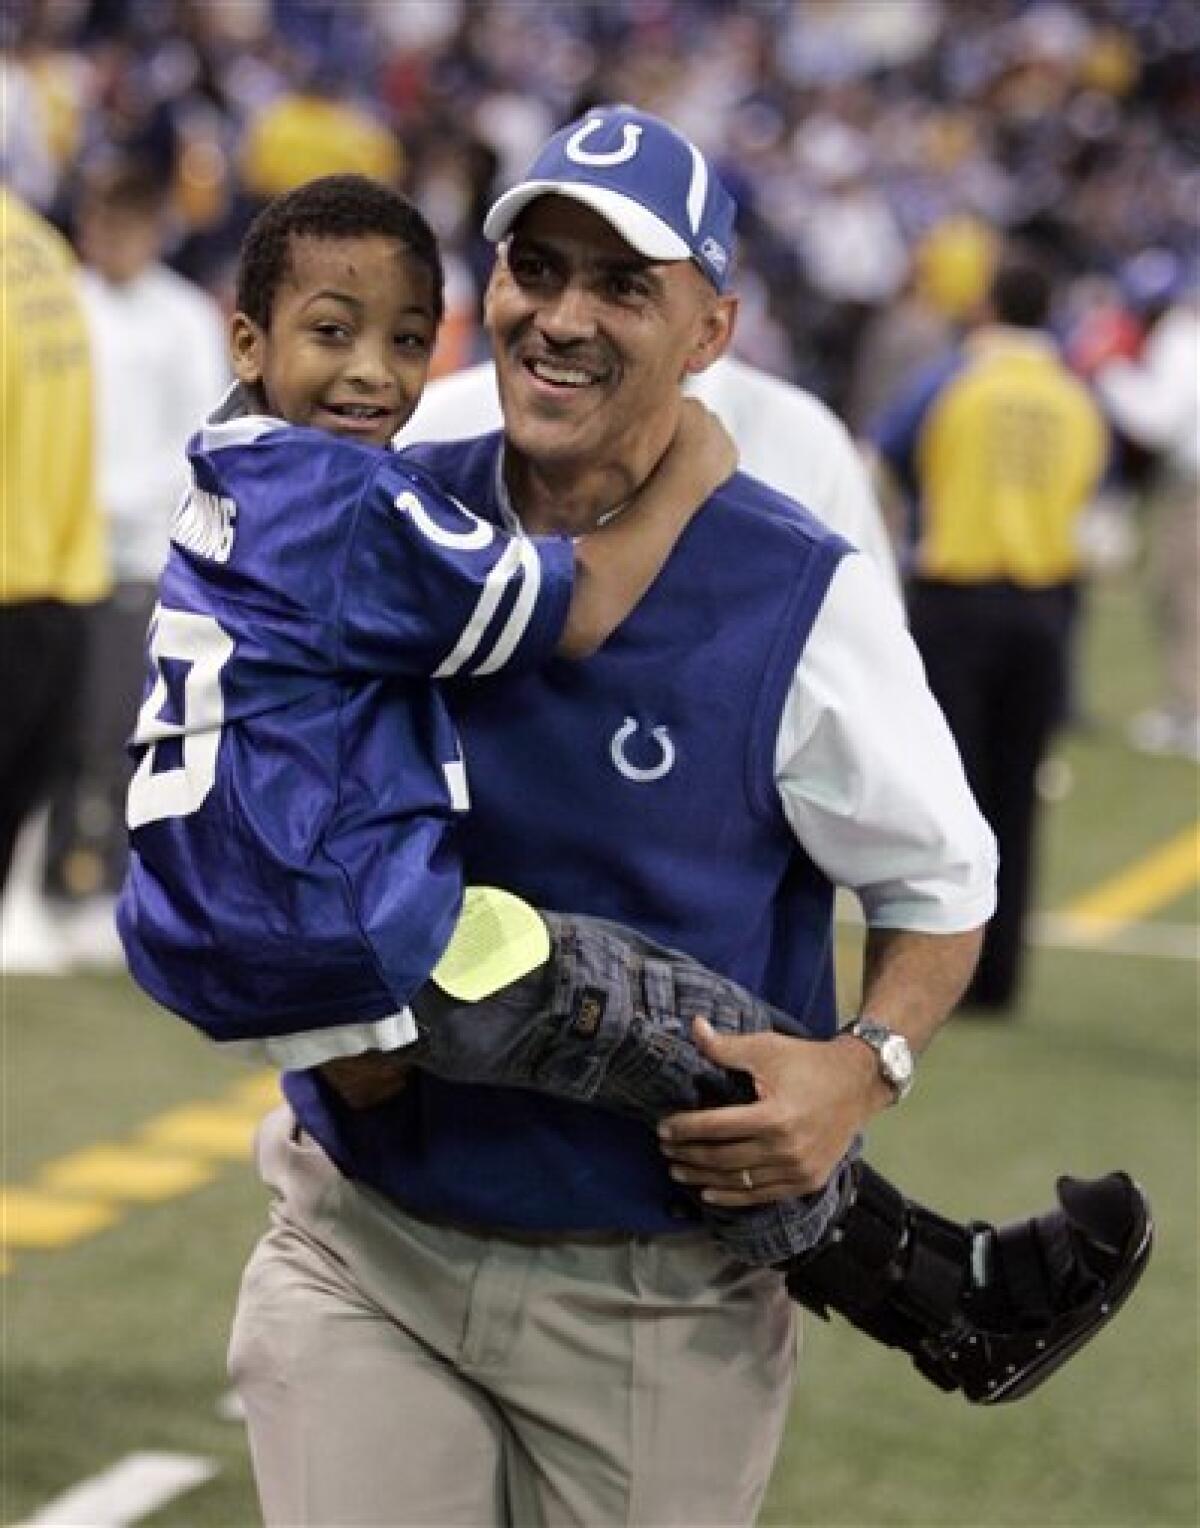 This Dec. 28, 2008 file photo shows Indianapolis Colts coach Tony Dungy carrying off his son, Jordan, after a Colts 23-0 win over the Tennessee Titans in a NFL football game in Indianapolis. Dungy is retiring after seven years as coach of the Indianapolis Colts, according to reports Monday Jan. 12, 2009. (AP Photo/Michael Conroy, File)